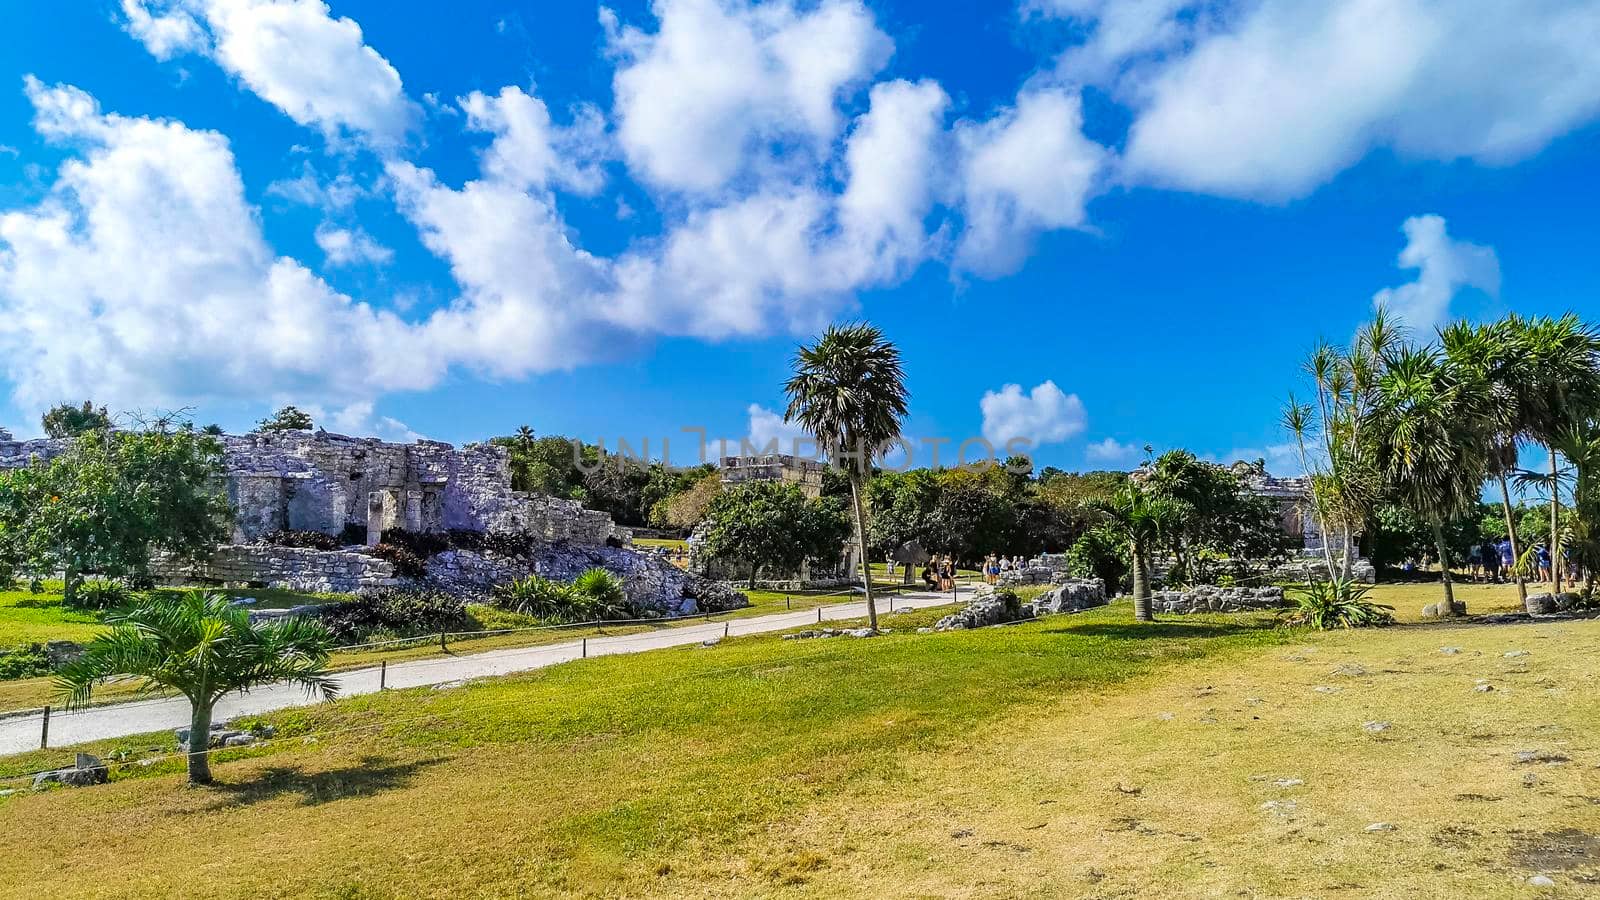 Ancient Tulum ruins Mayan site temple pyramids artifacts seascape Mexico. by Arkadij